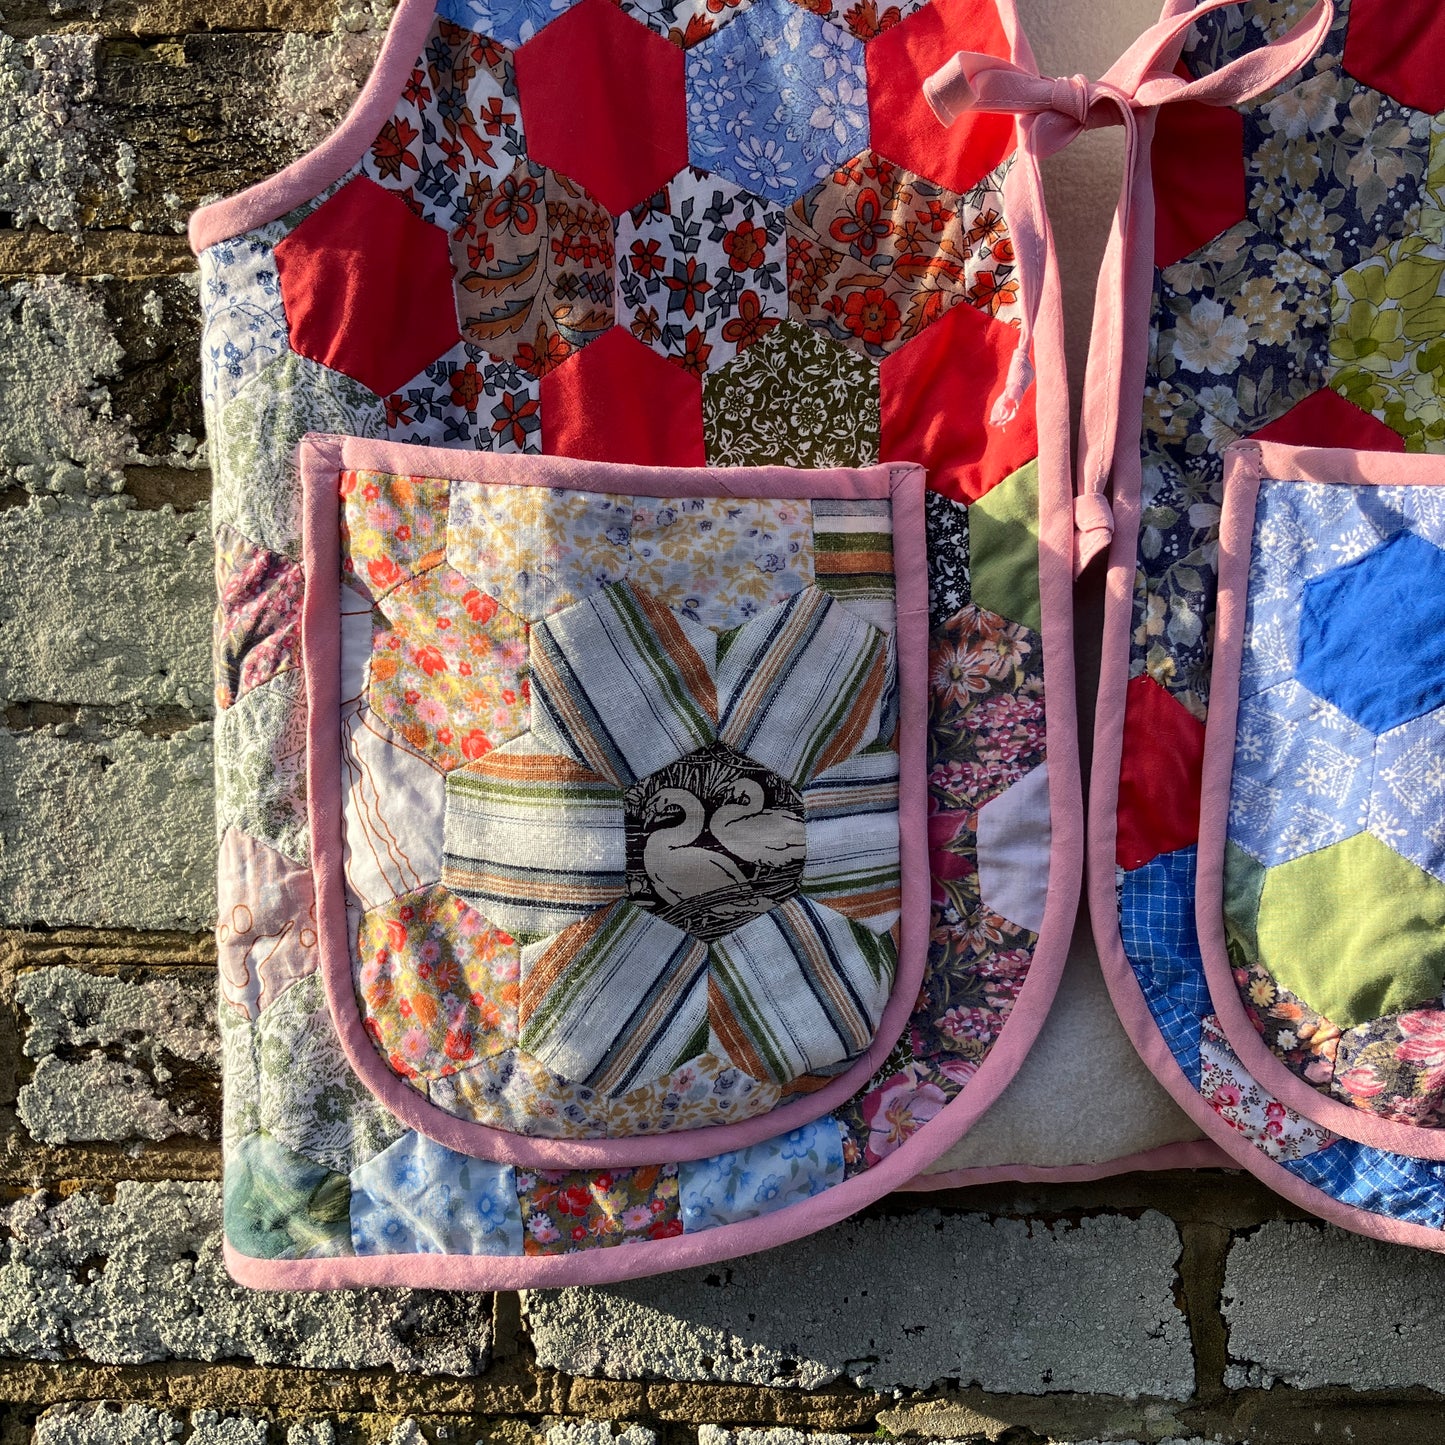 Hand-pieced recycled patchwork quilt vest